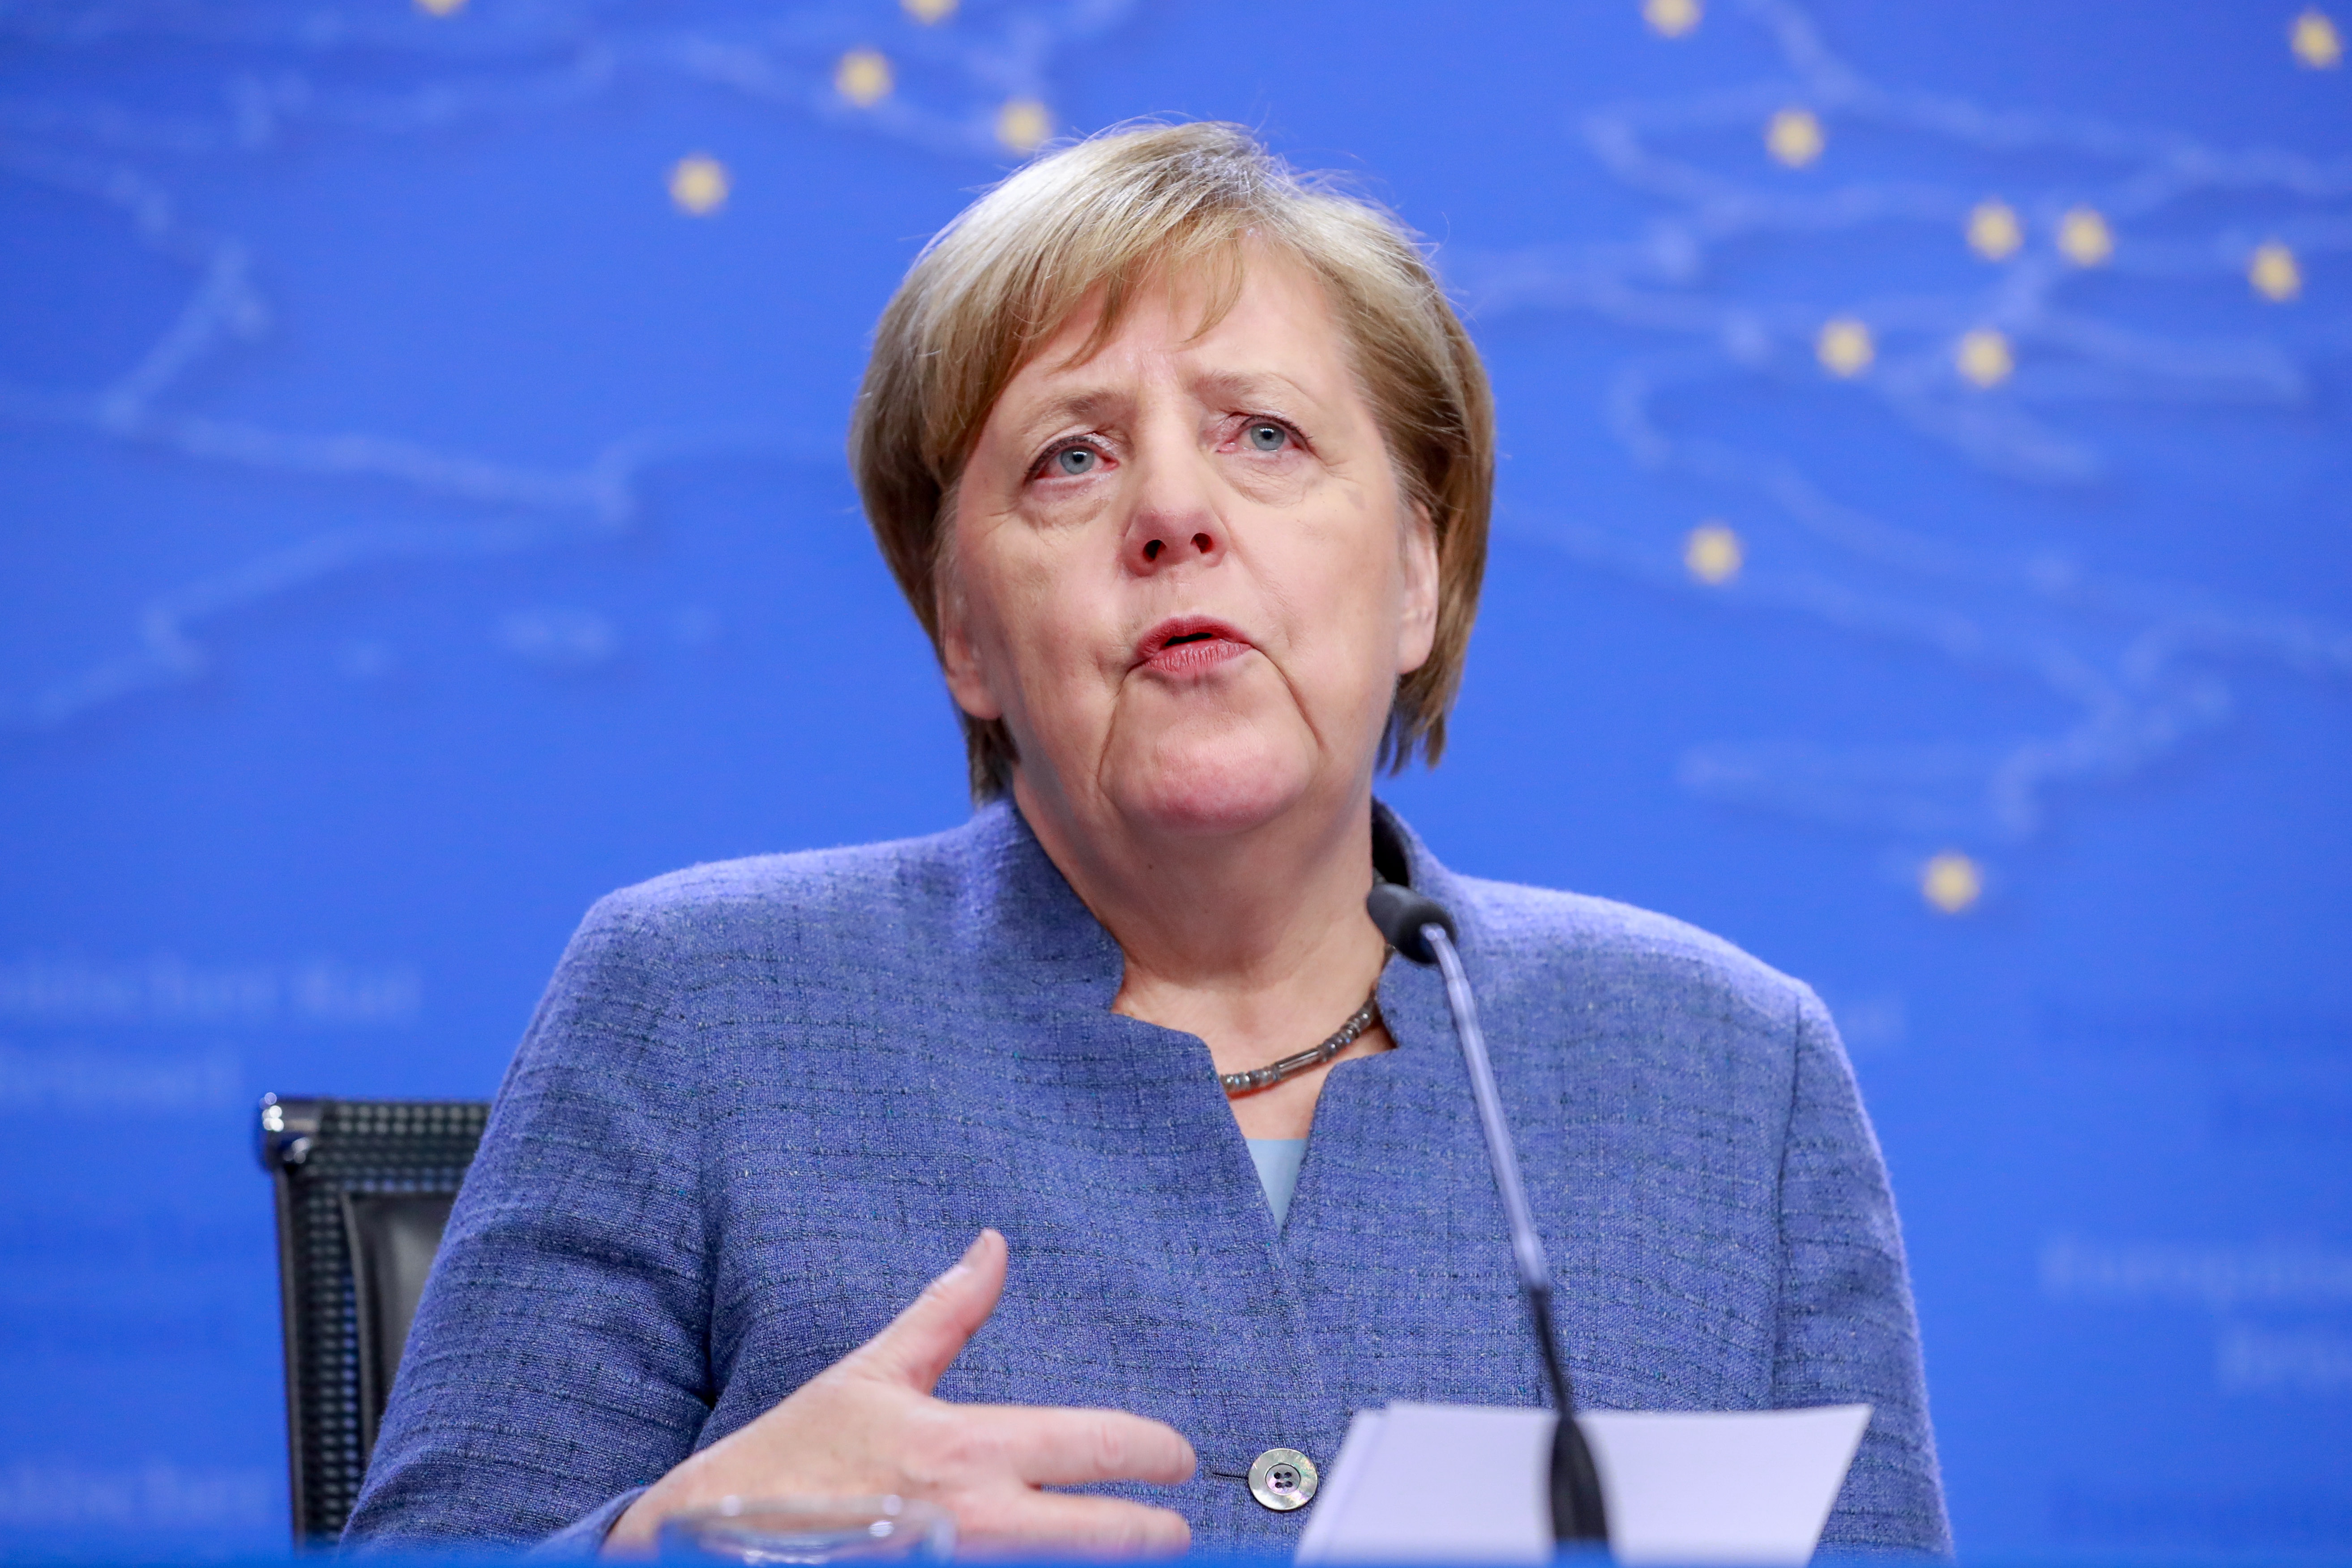 epa07231433 German Chancellor Angela Merkel speaks at a news conference at the end of an European Council meeting in Brussels, Belgium, 14 December 2018. On the second day of summit EU leader again focussed on the conclusions on the Single Market, climate change, migration, disinformation, the fight against racism and xenophobia, and citizens' consultations.  EPA/STEPHANIE LECOCQ